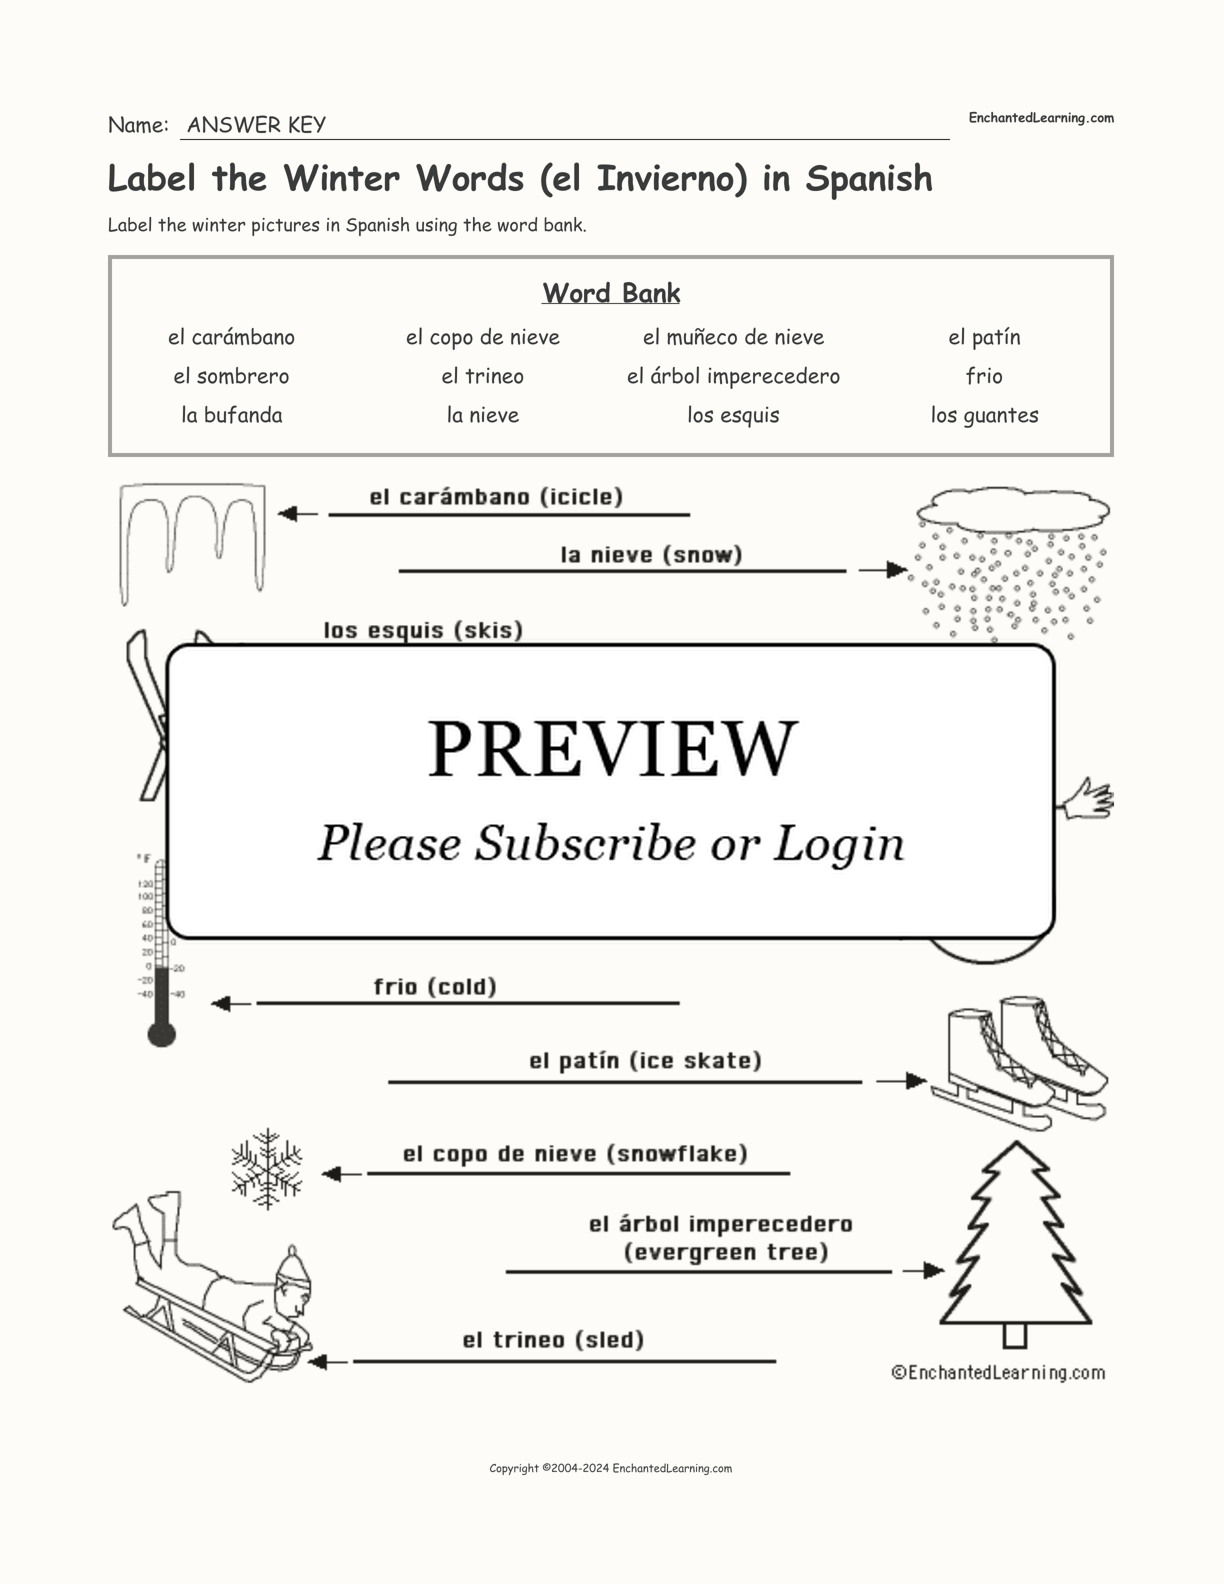 Label the Winter Words (el Invierno) in Spanish interactive worksheet page 2